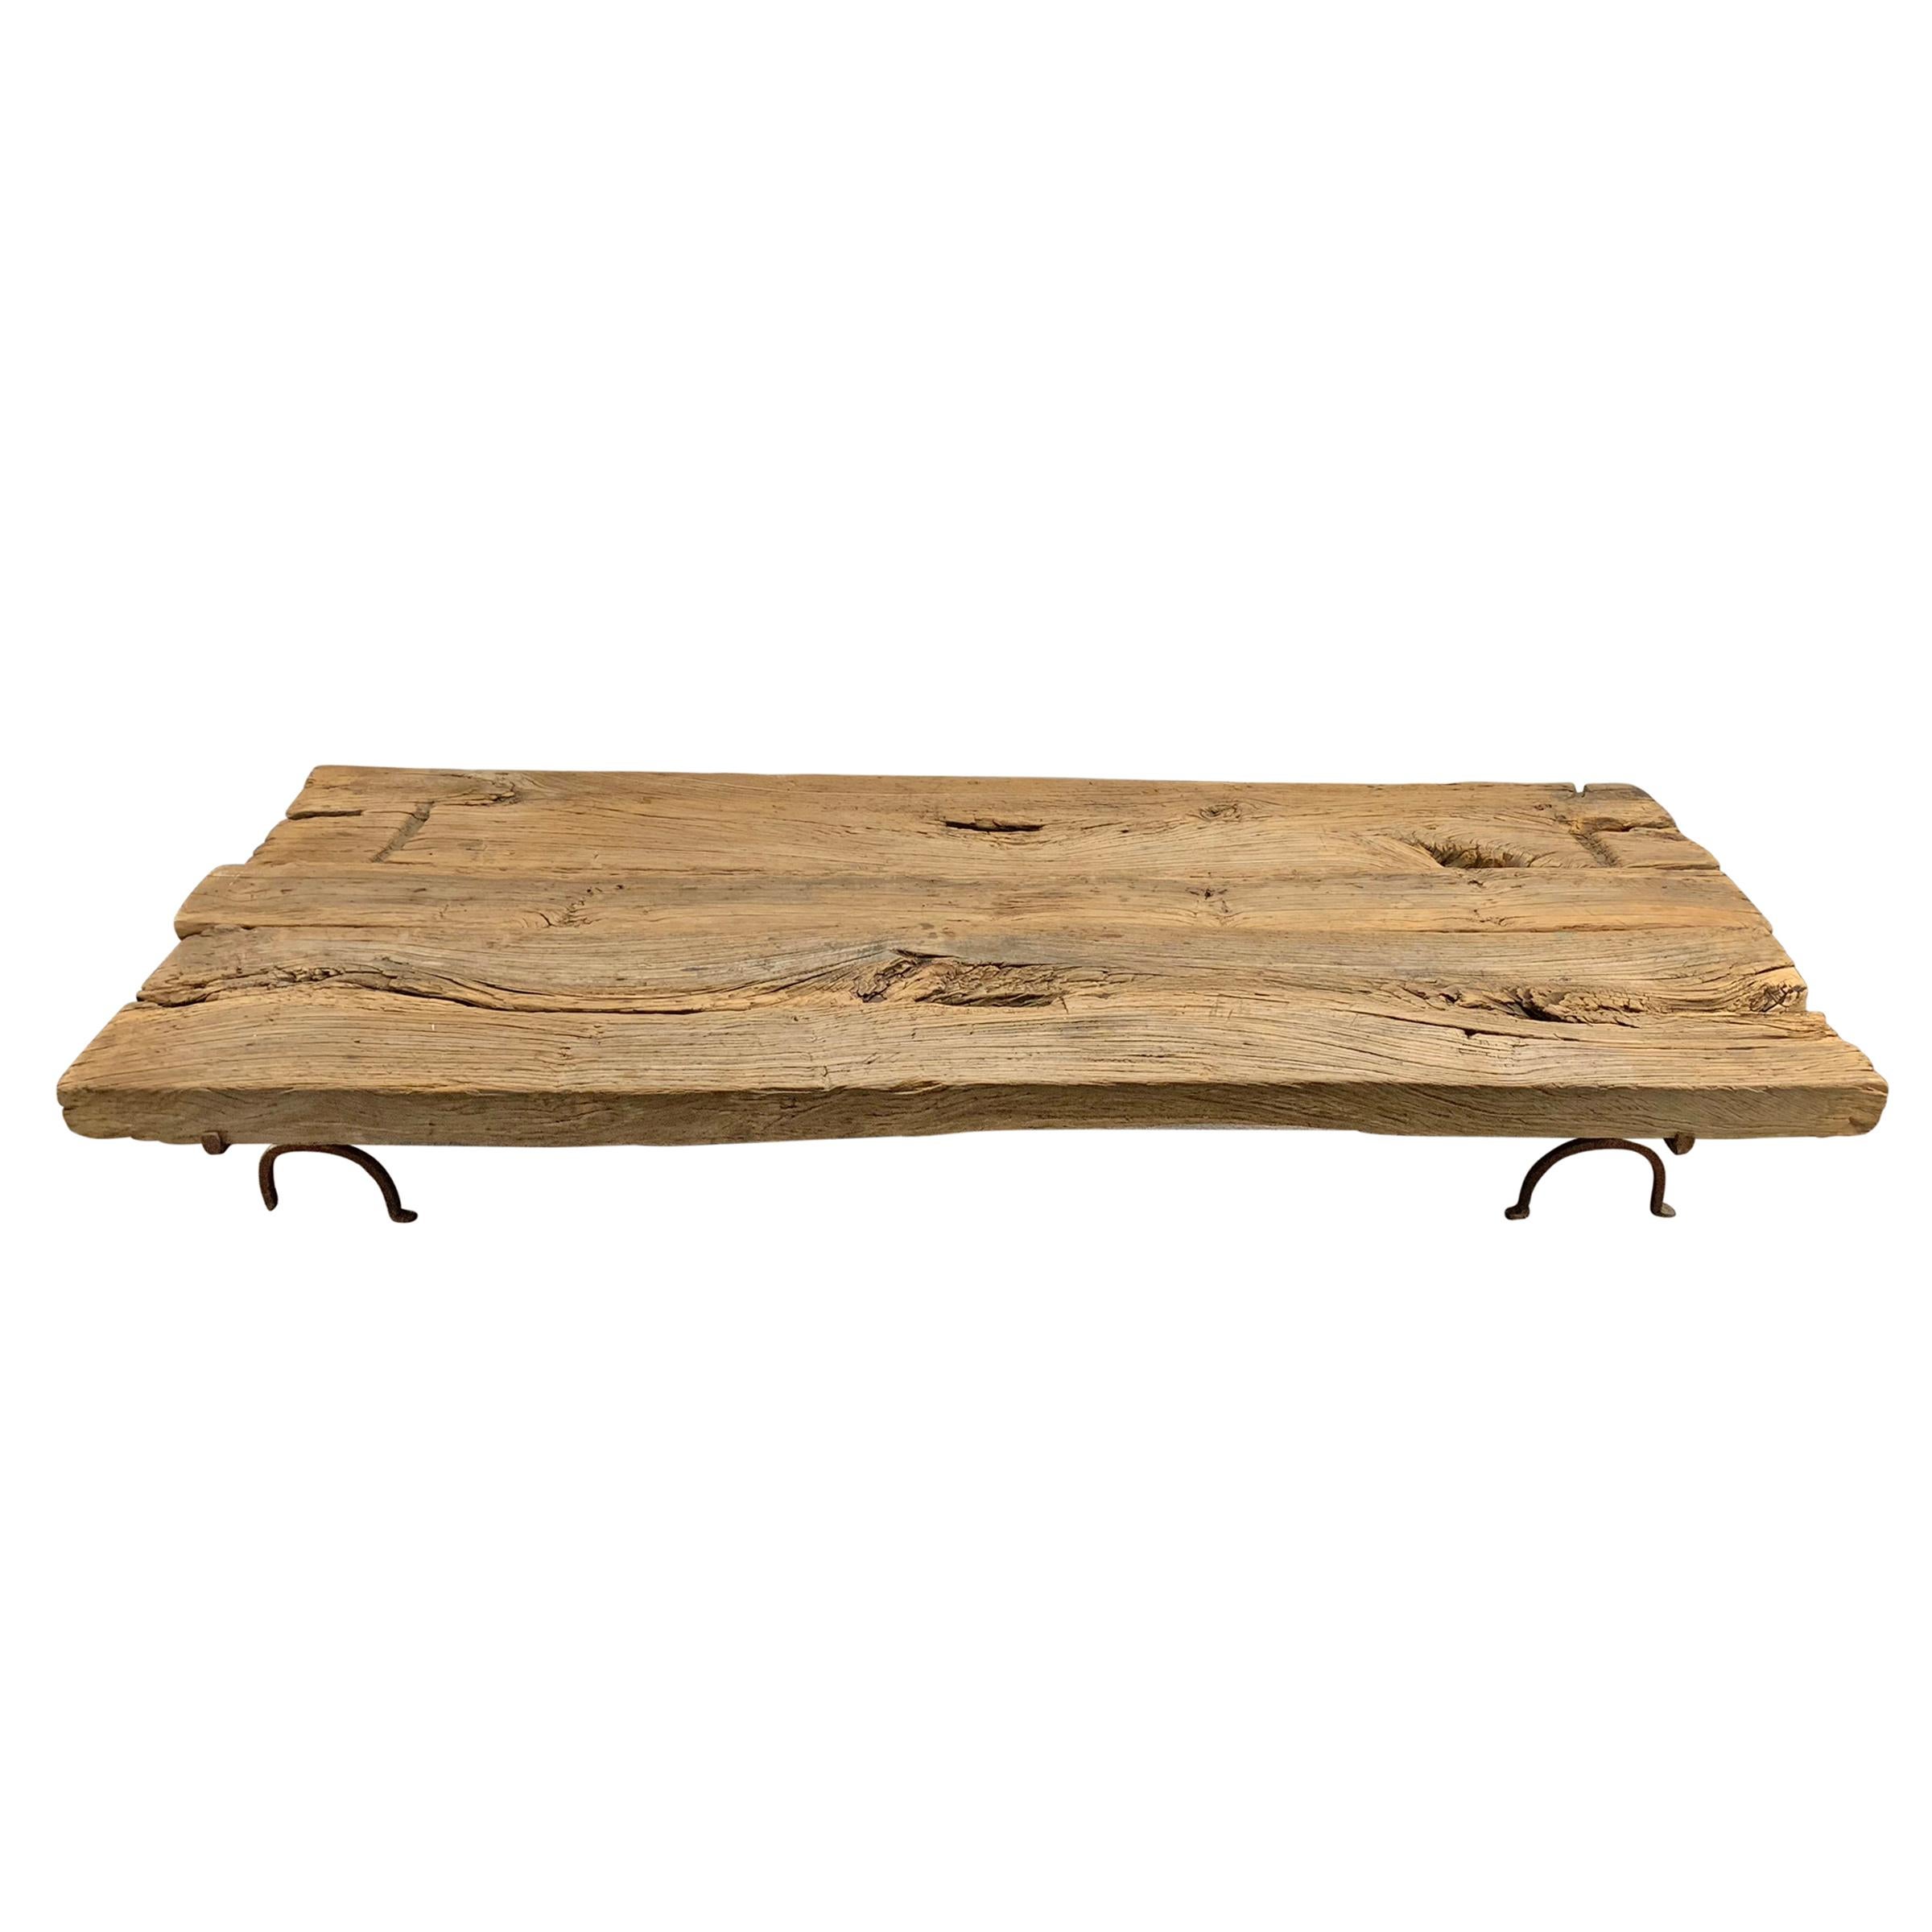 Rustic Monumental Low Table Made from Ancient Timbers